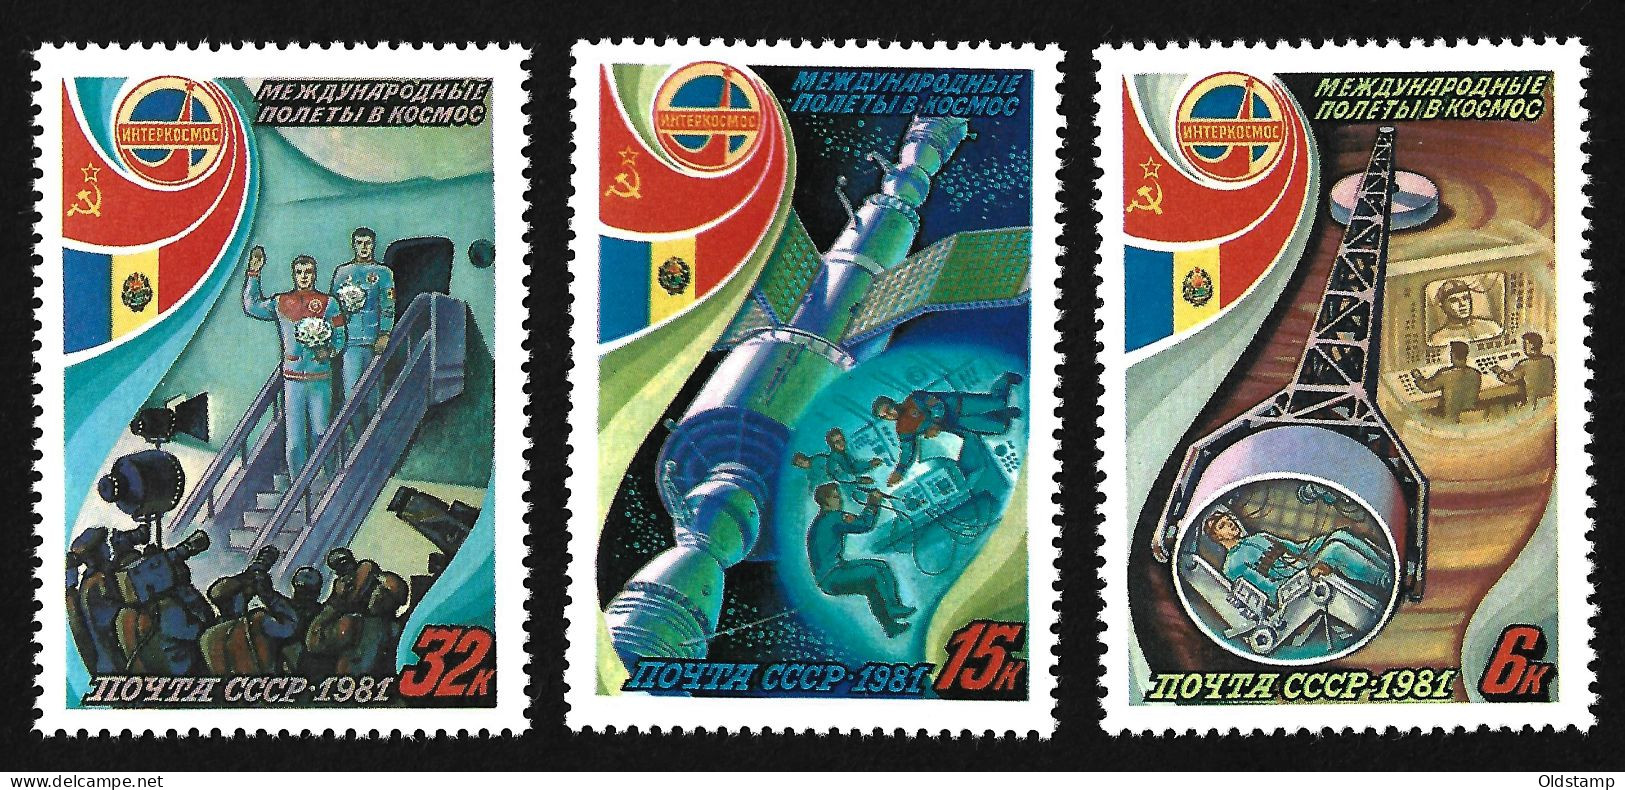 SPACE USSR 1981 INTERCOSMOS MNH Full Set Astronauts Soviet-Romania Space Program Stamps Mi.# 5071 - 5073 - Collections